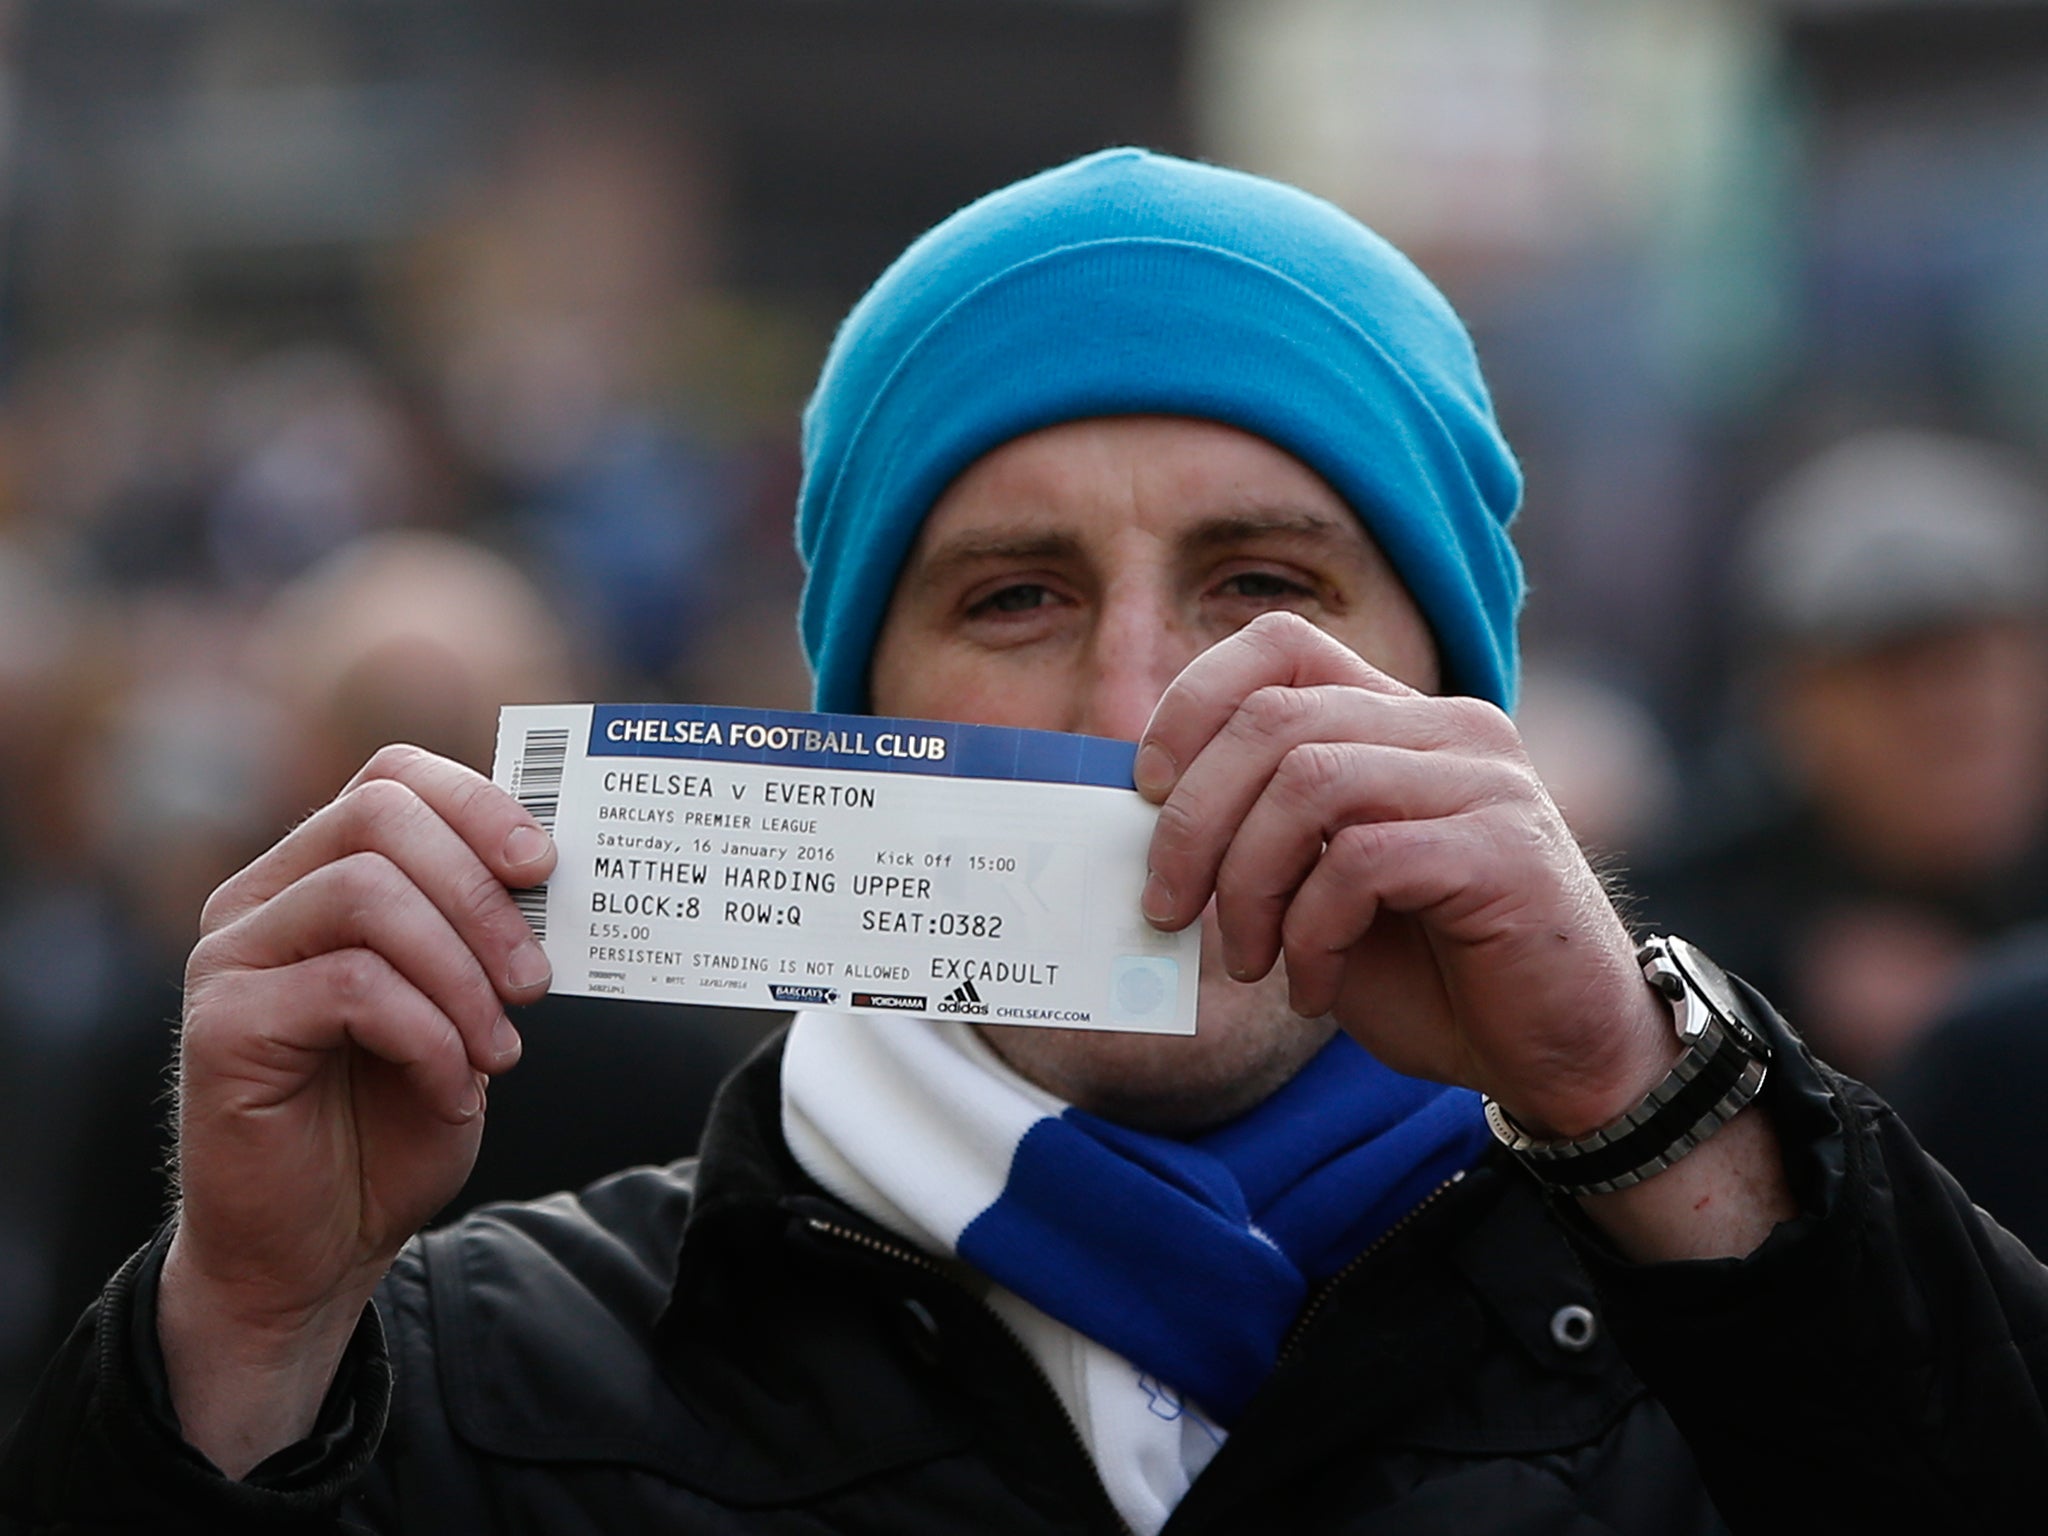 Premier League away ticket prices have been capped at £30